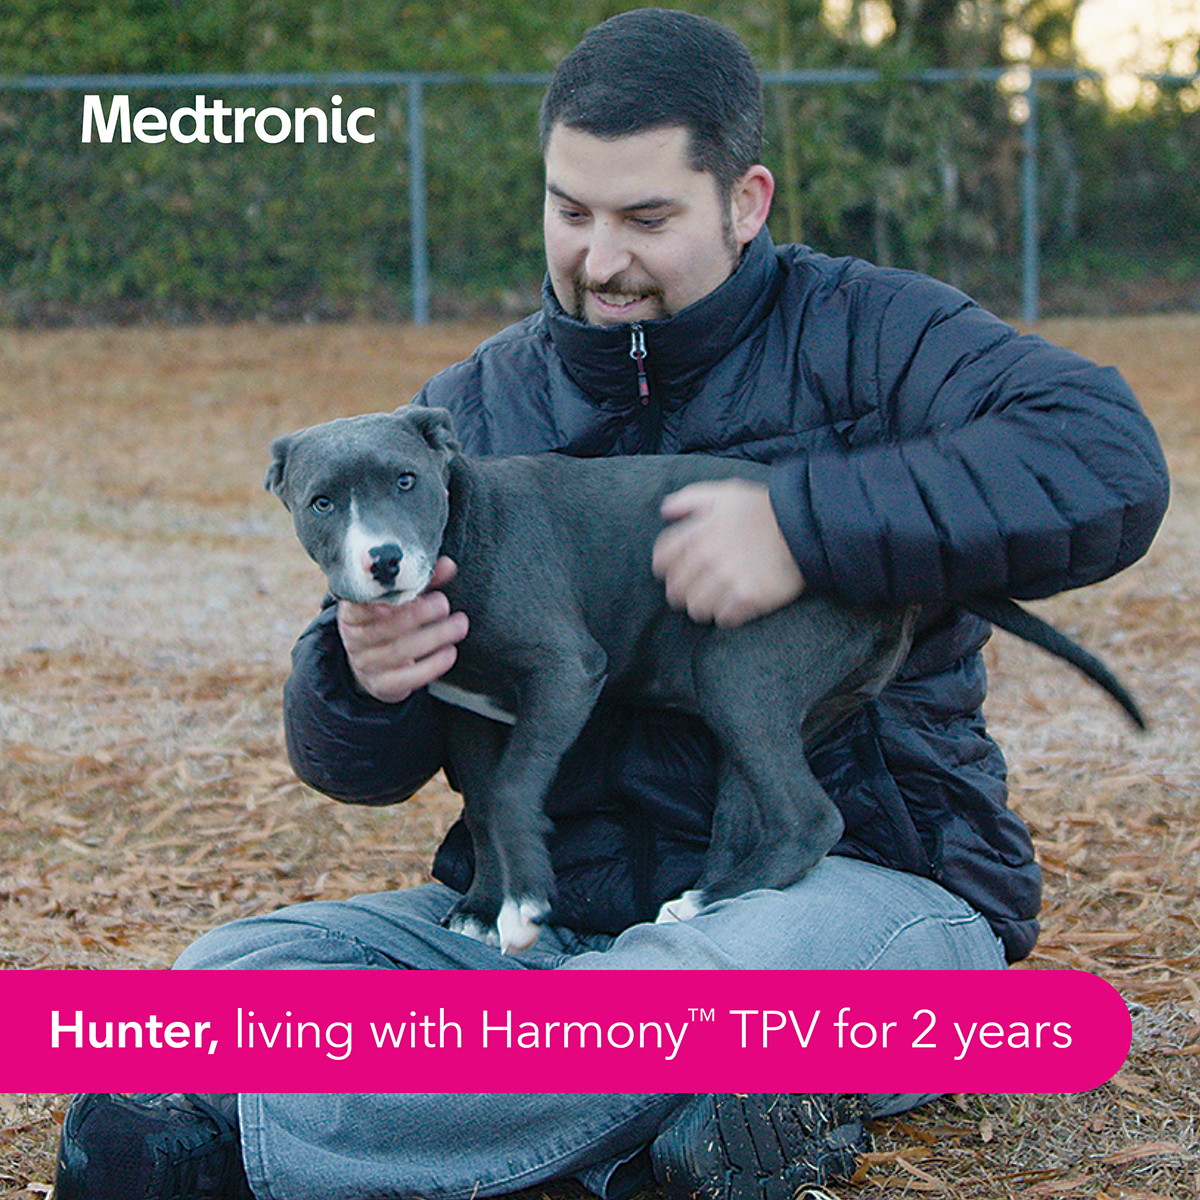 Find out what living life with Harmony™ TPV feels like for Hunter, 2 years post procedure. See risk info bit.ly/47Q5JPp Learn more: bit.ly/3SVq7uc #HarmonyTPV1000